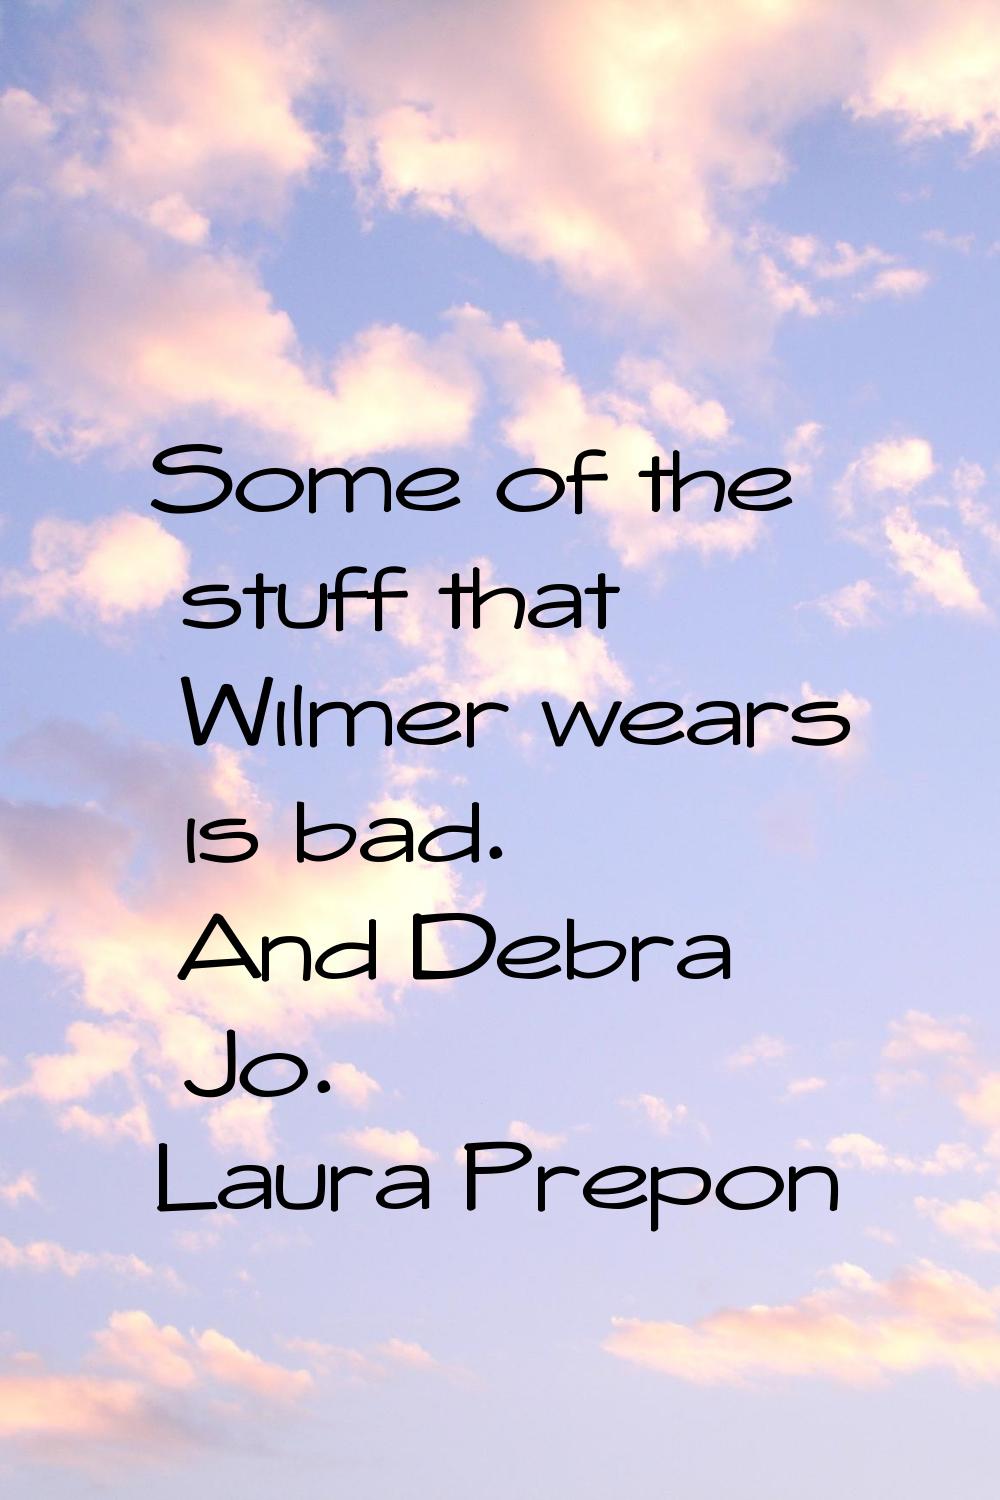 Some of the stuff that Wilmer wears is bad. And Debra Jo.